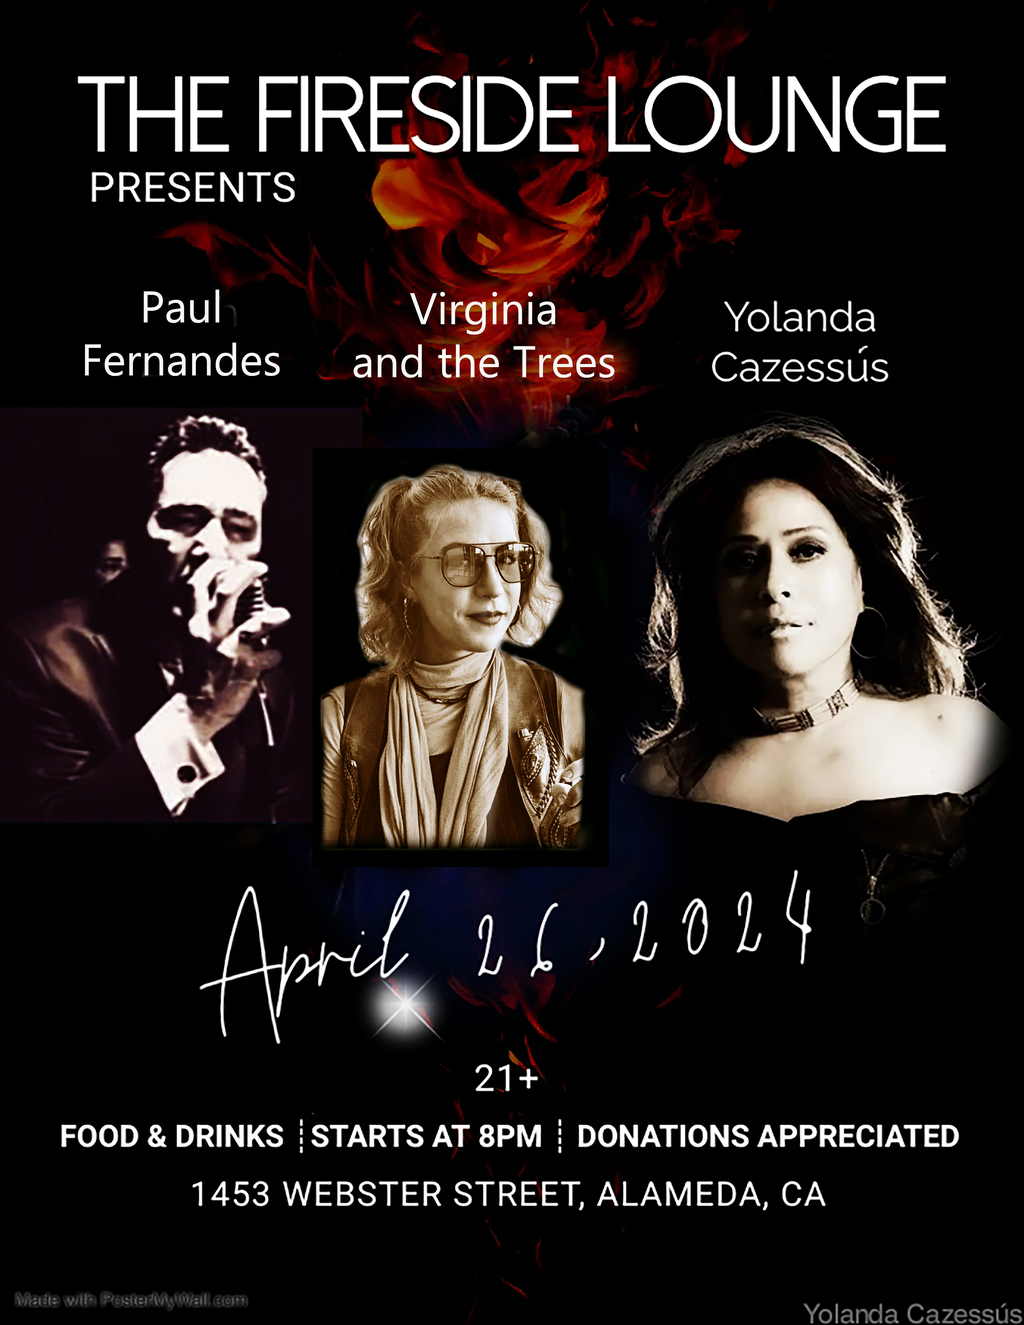 The Fireside Lounge Join Us at The Fireside Lounge for a Night of Live Music with Yolanda Fernandes and the Trees promotion flier on Digifli com